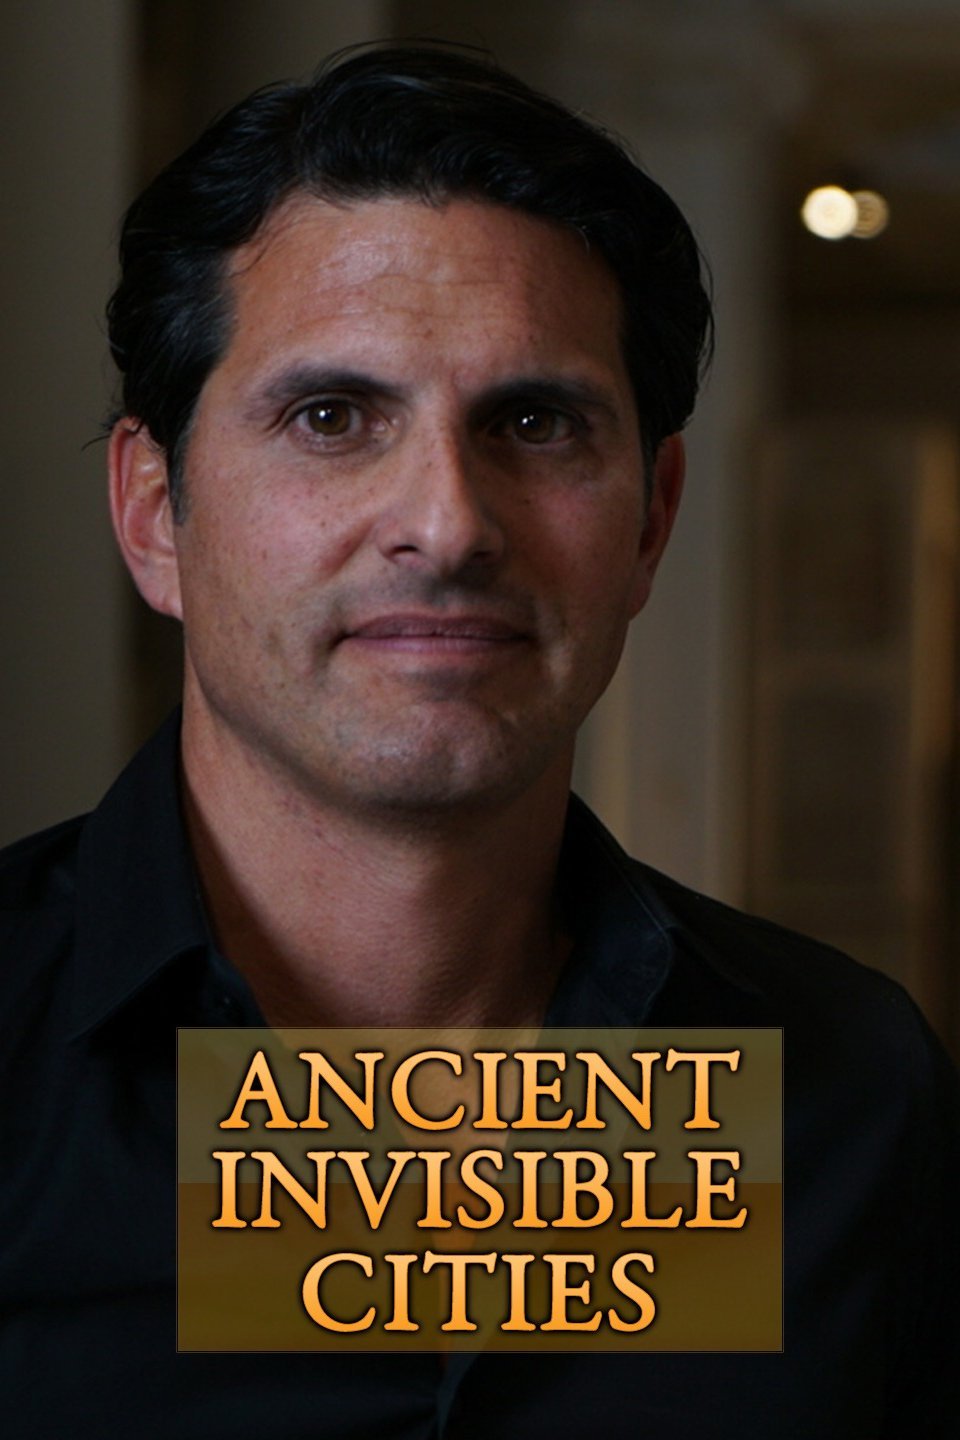 pbs ancient invisible cities